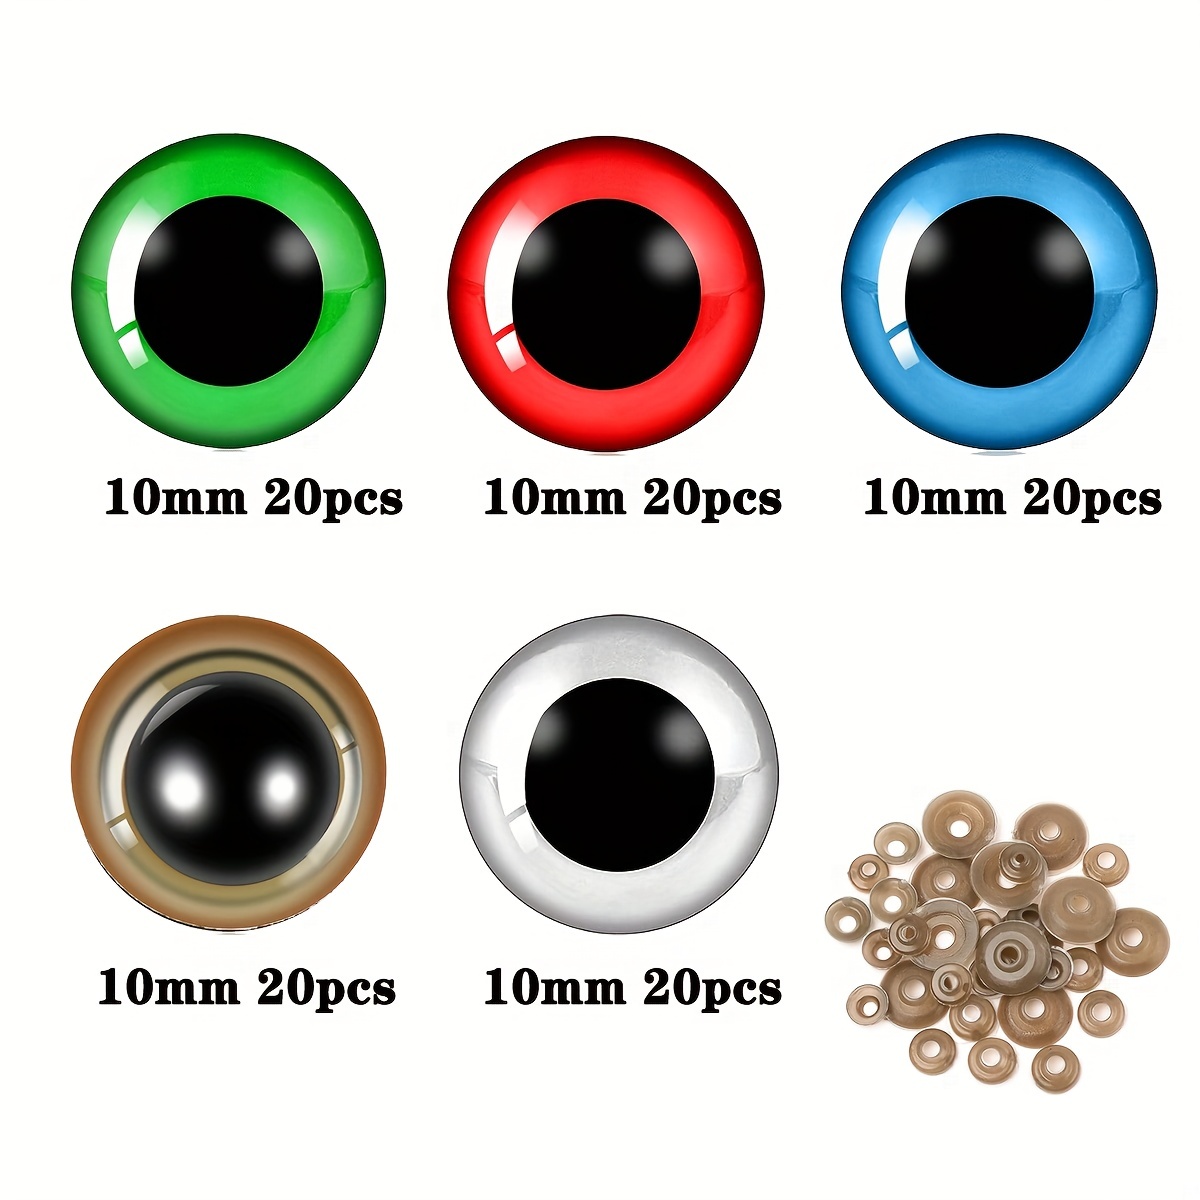 100pcs 10mm 5-color Plush Animal Safety Eyes With Plastic Craft